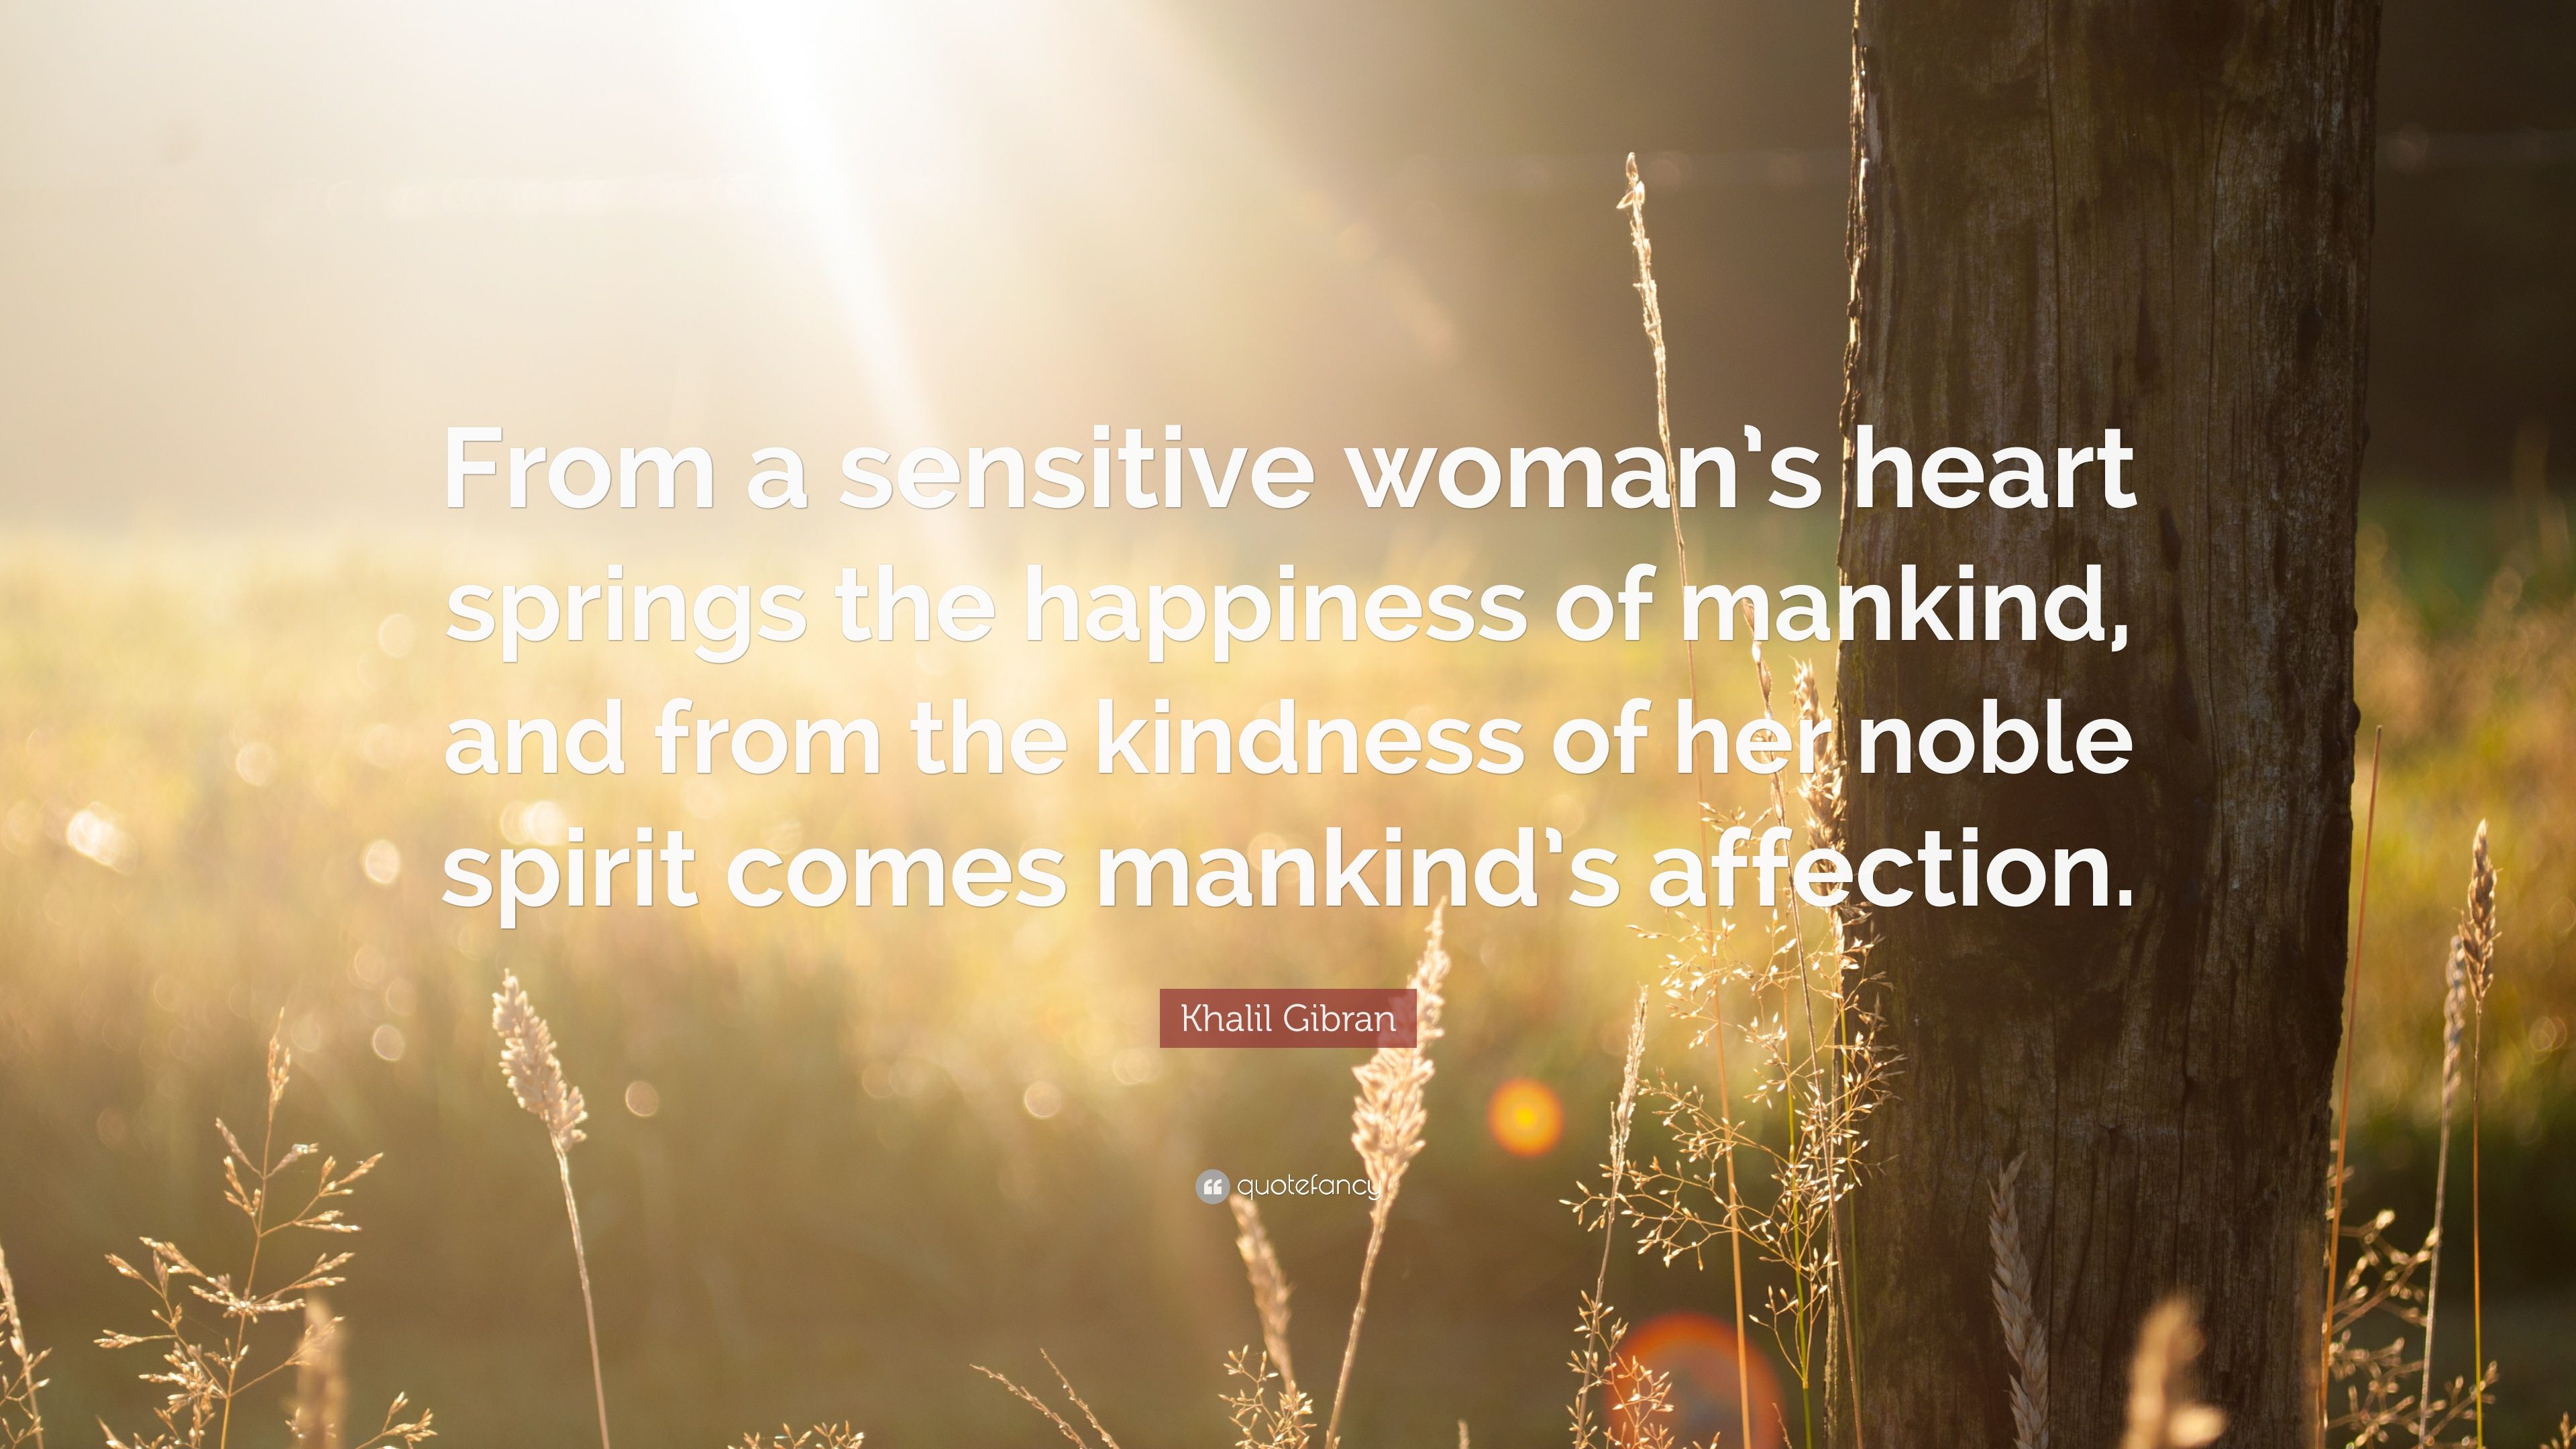 Khalil Gibran Quote: “From a sensitive woman's heart springs